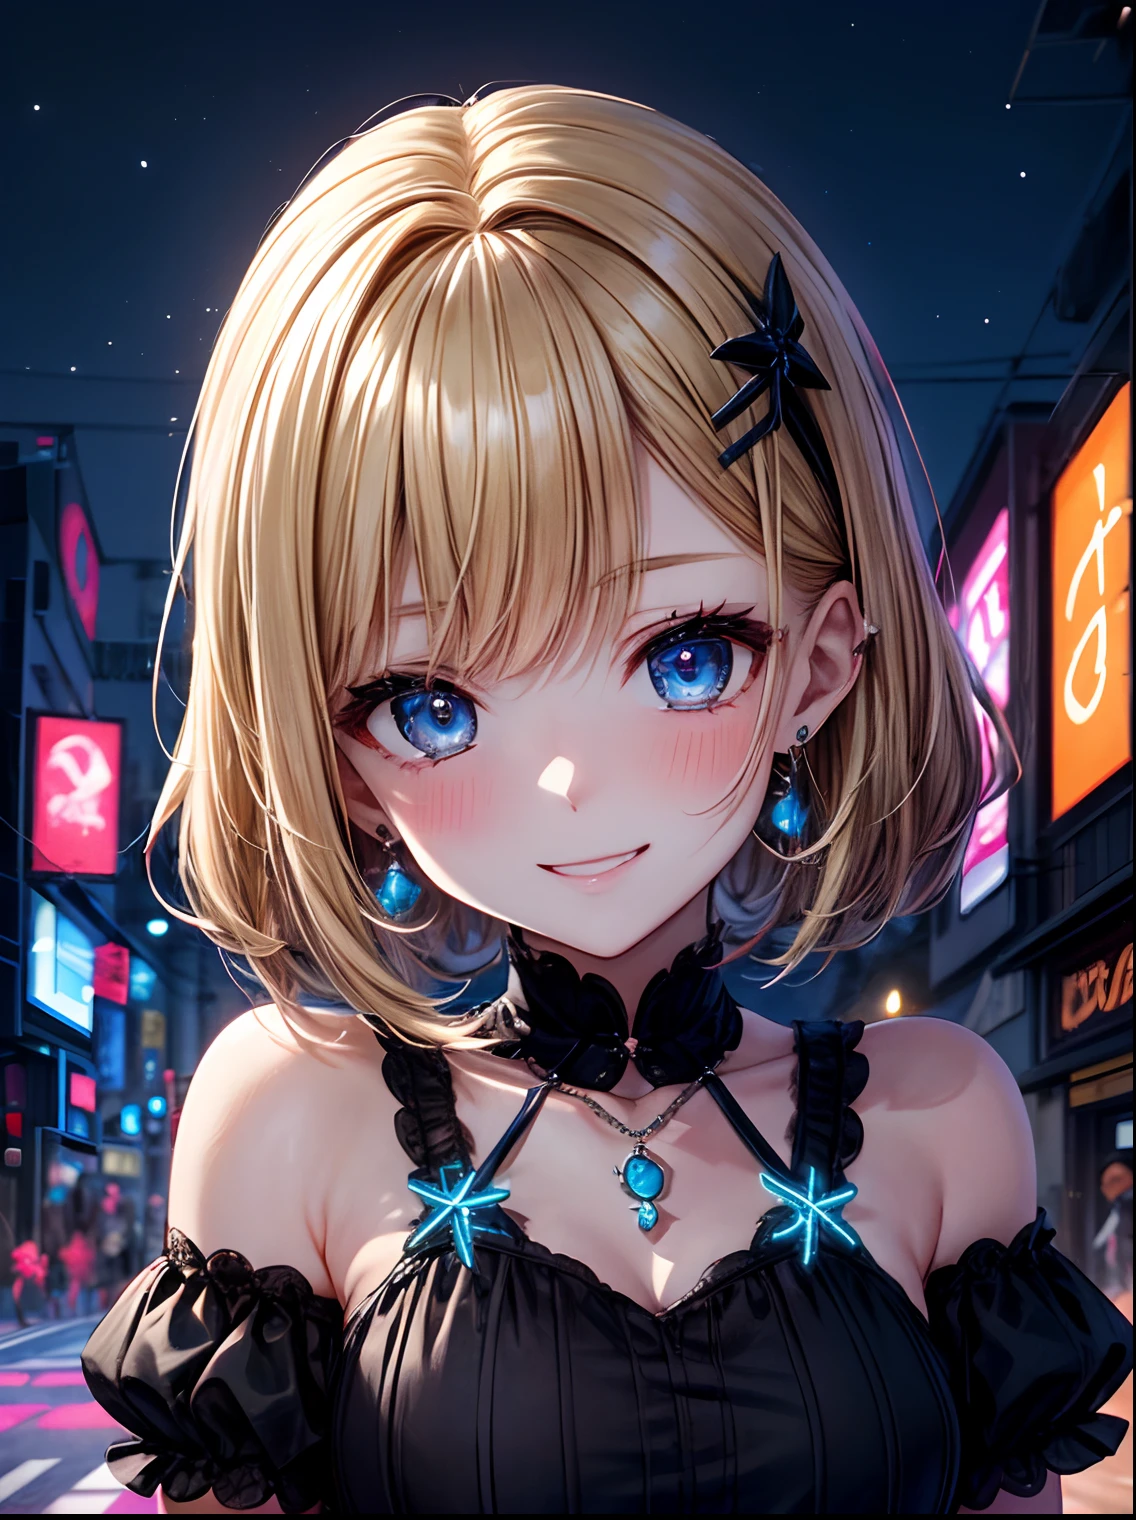 absurderes, (solo:1.5,)ultra-detailliert,bright colour, extremely beautiful detailed anime face and eyes, view straight on, ;D, shiny_skin,25 years old, Happy smiling face、Short hair, , asymmetrical bangs, Blonde hair with short twin tails, Shiny hair, Delicate beautiful face, red blush、(Blue eyes), White skin, hair clips, earrings, a necklace, 、Black and yellow dresidnight Tokyo)、(Lots of neon:1.3),starrysky